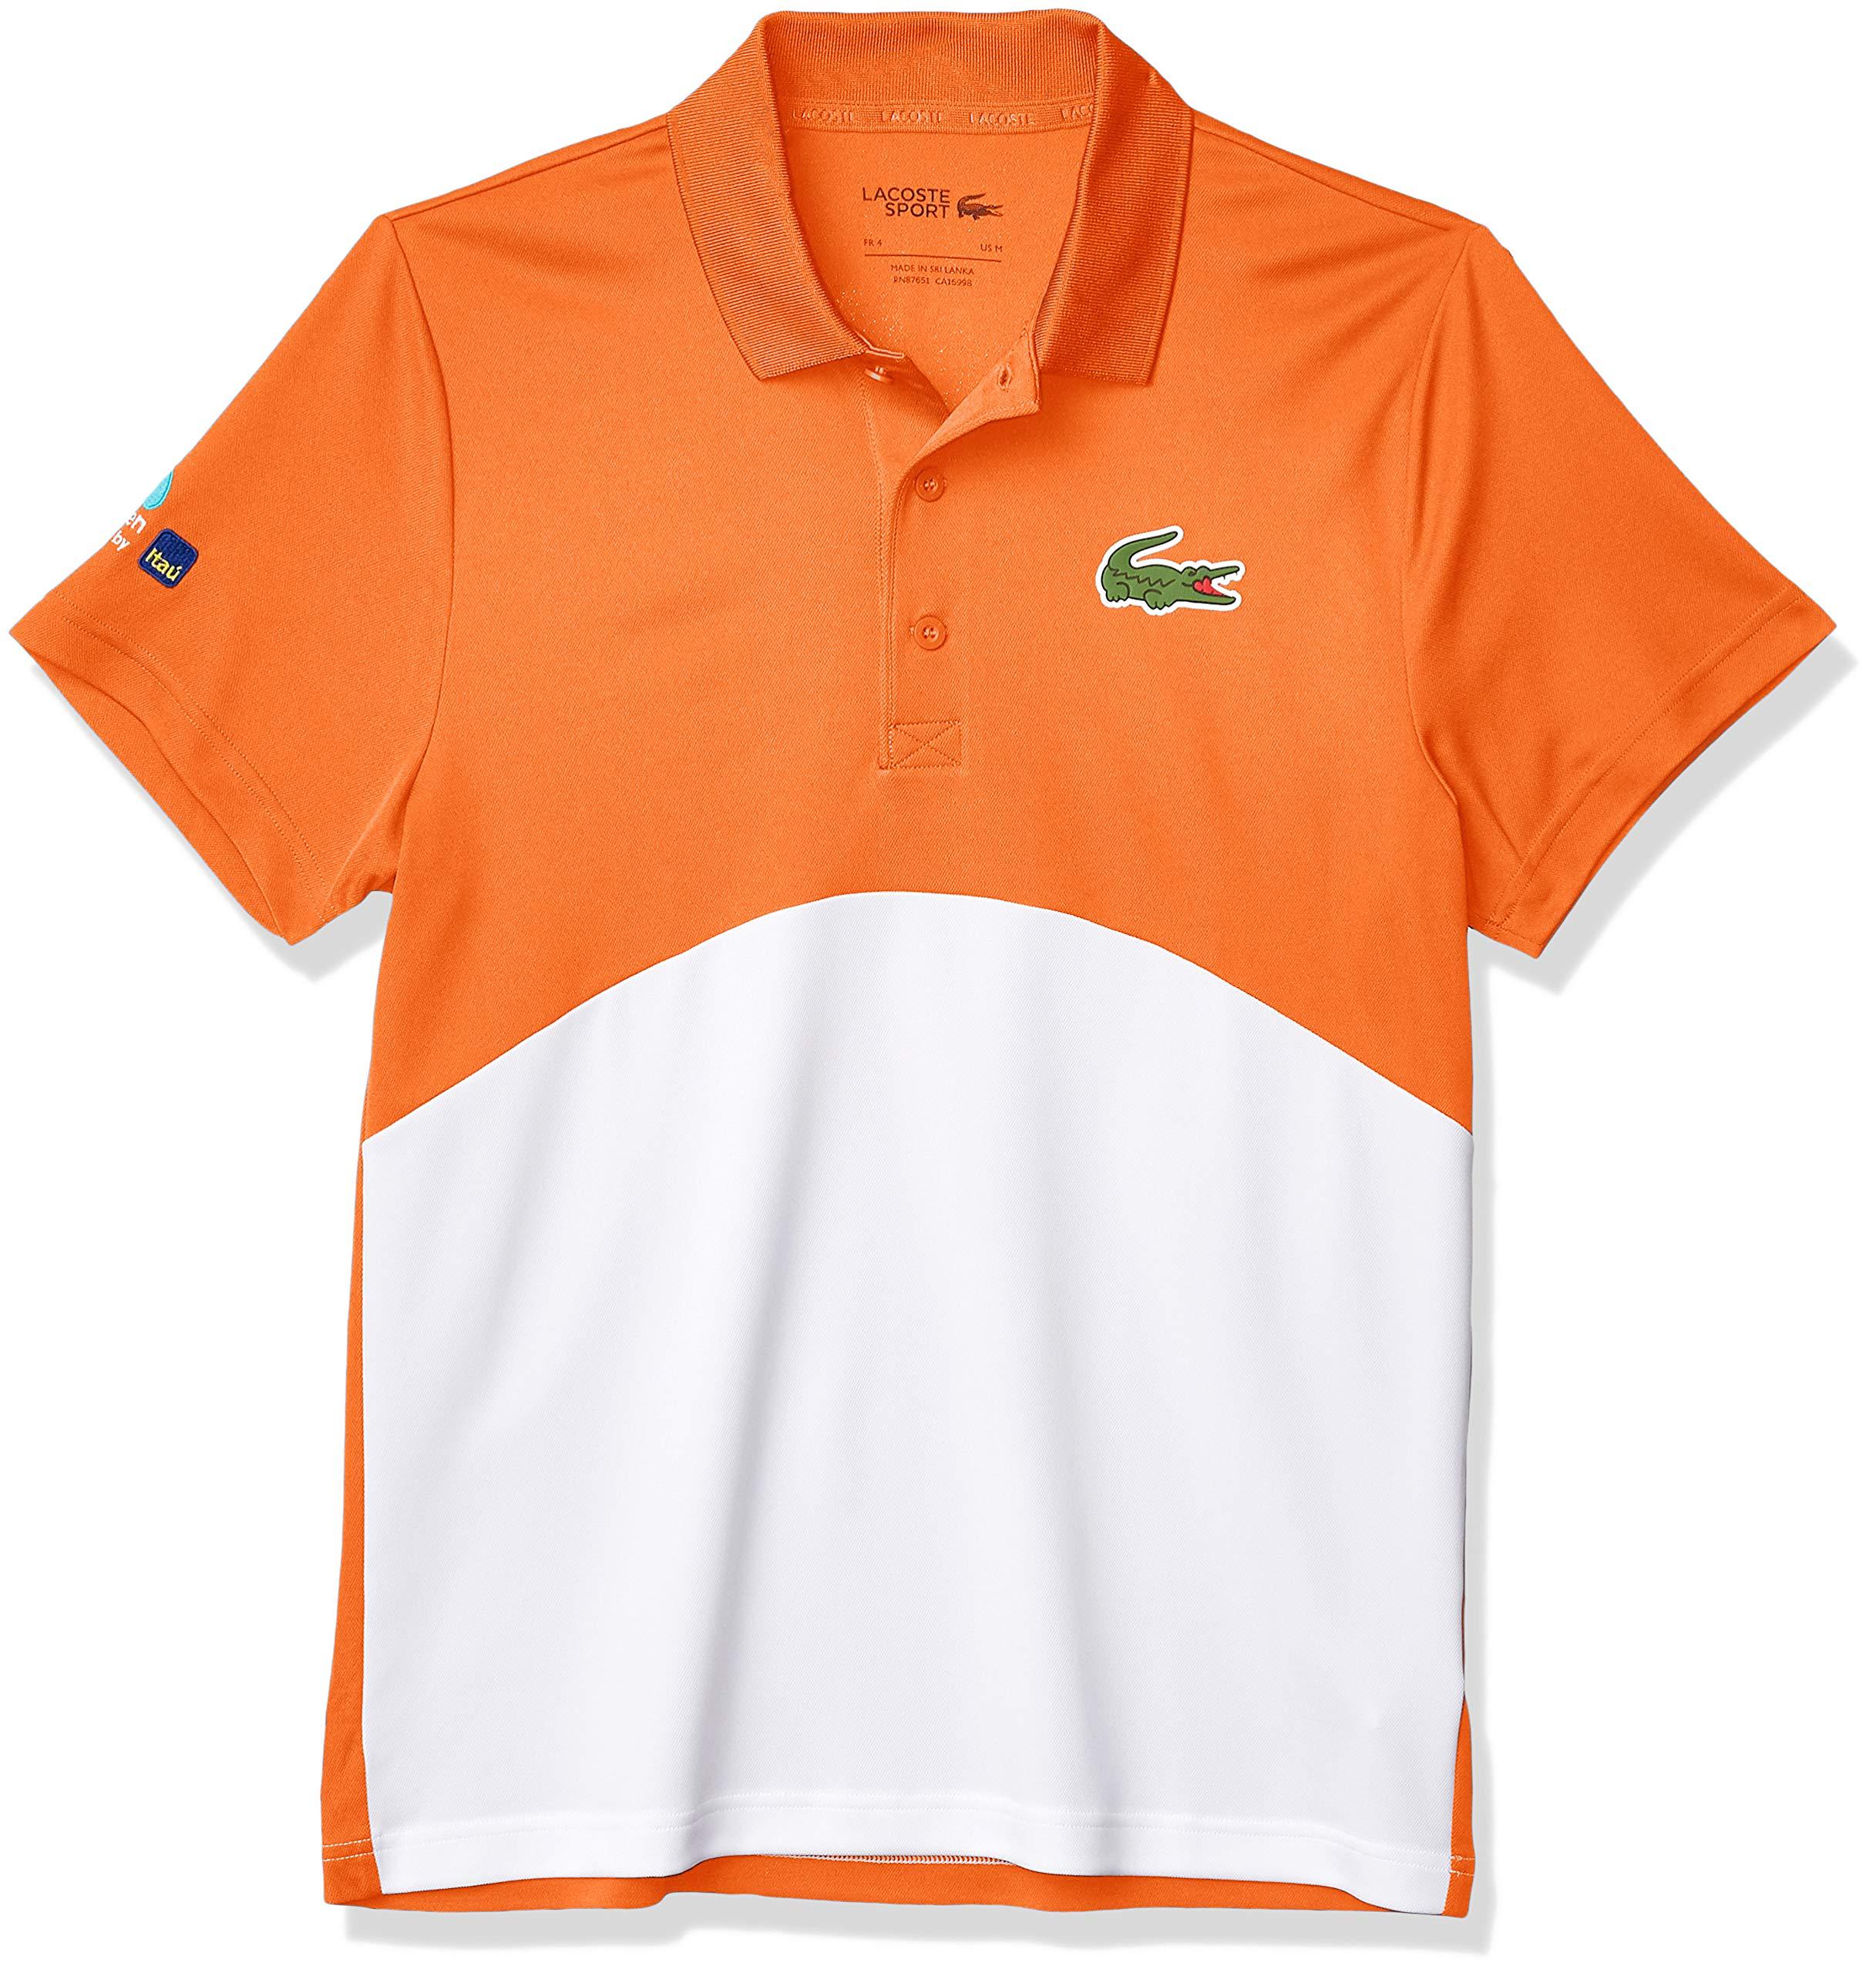 Lacoste Sport Miami Open Ultra Dry Colorblock Polo Shirt for Men - Lyst